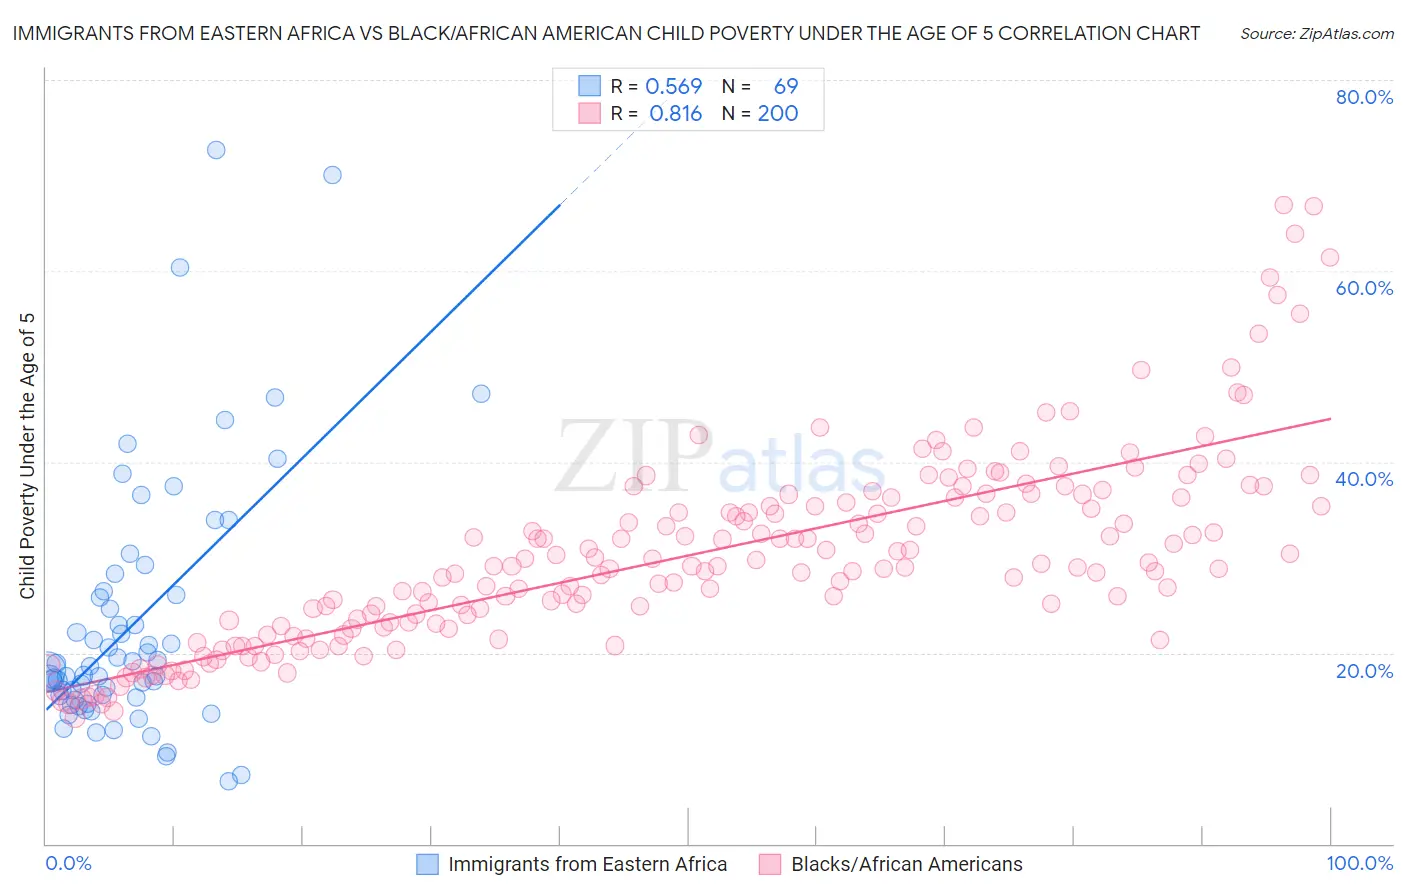 Immigrants from Eastern Africa vs Black/African American Child Poverty Under the Age of 5